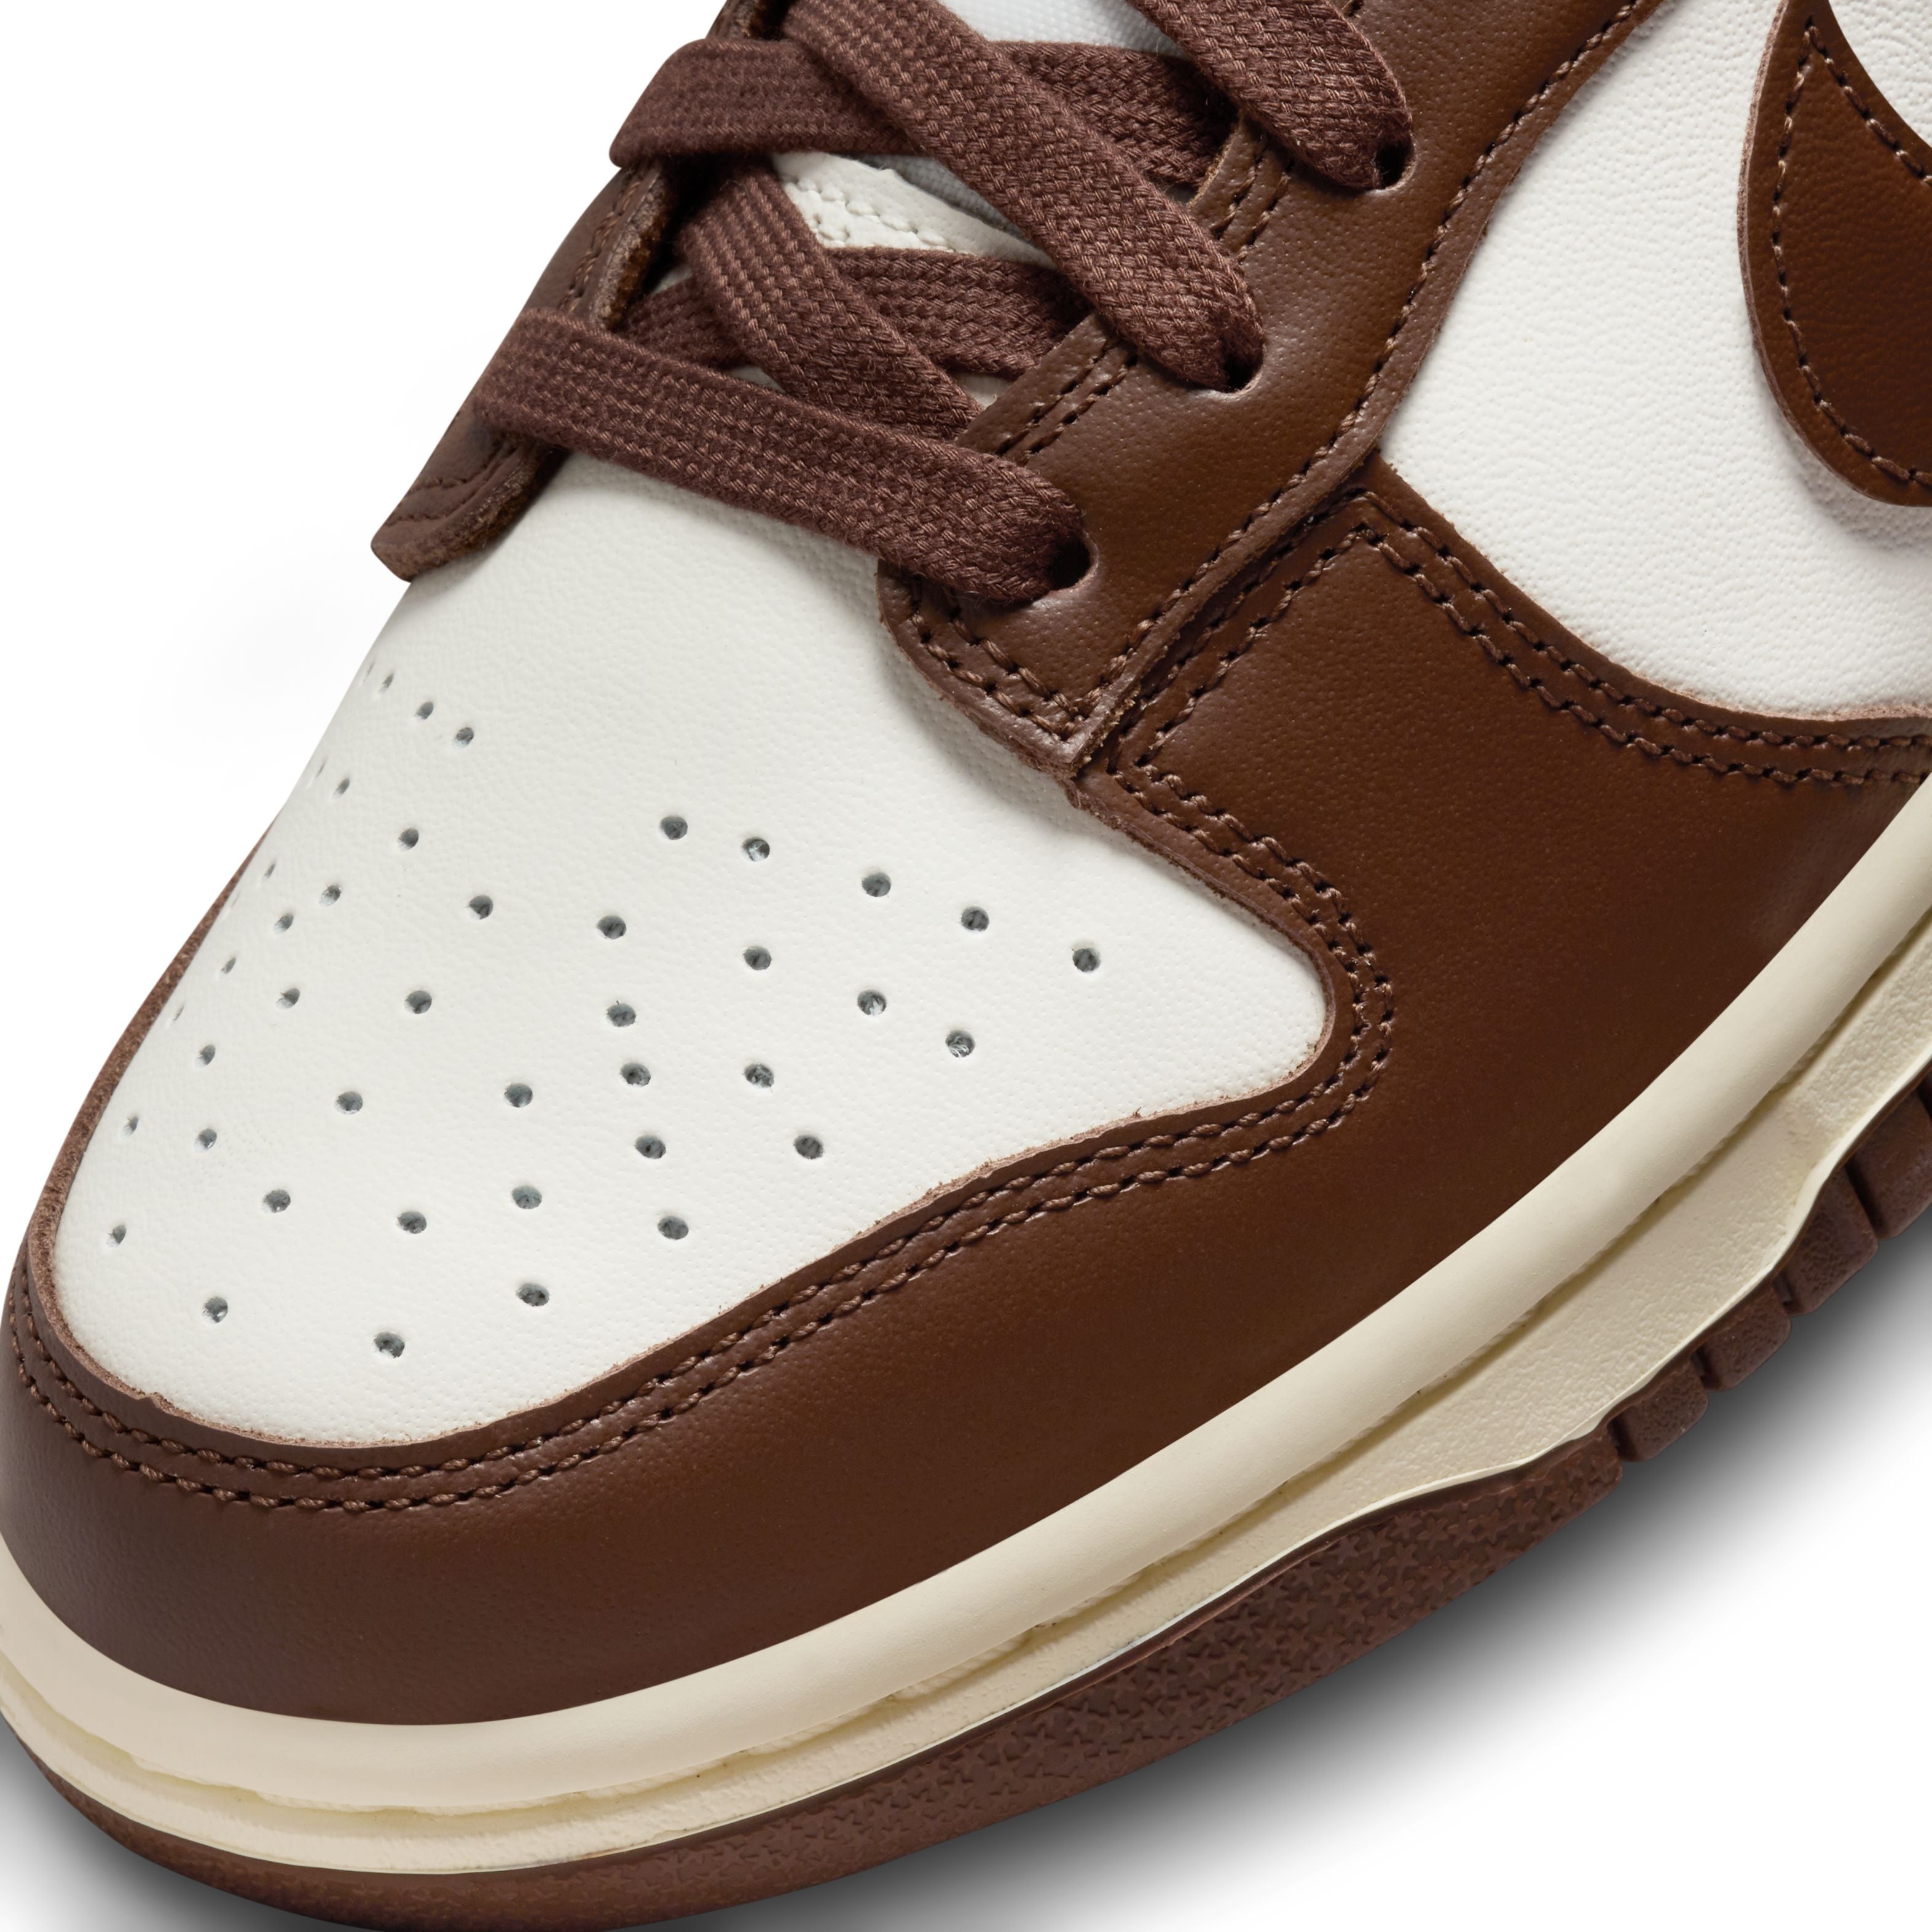 Dunk Low - &#39;Cacao Wow&#39; - Sail/Cacao Wow/Coconut Milk